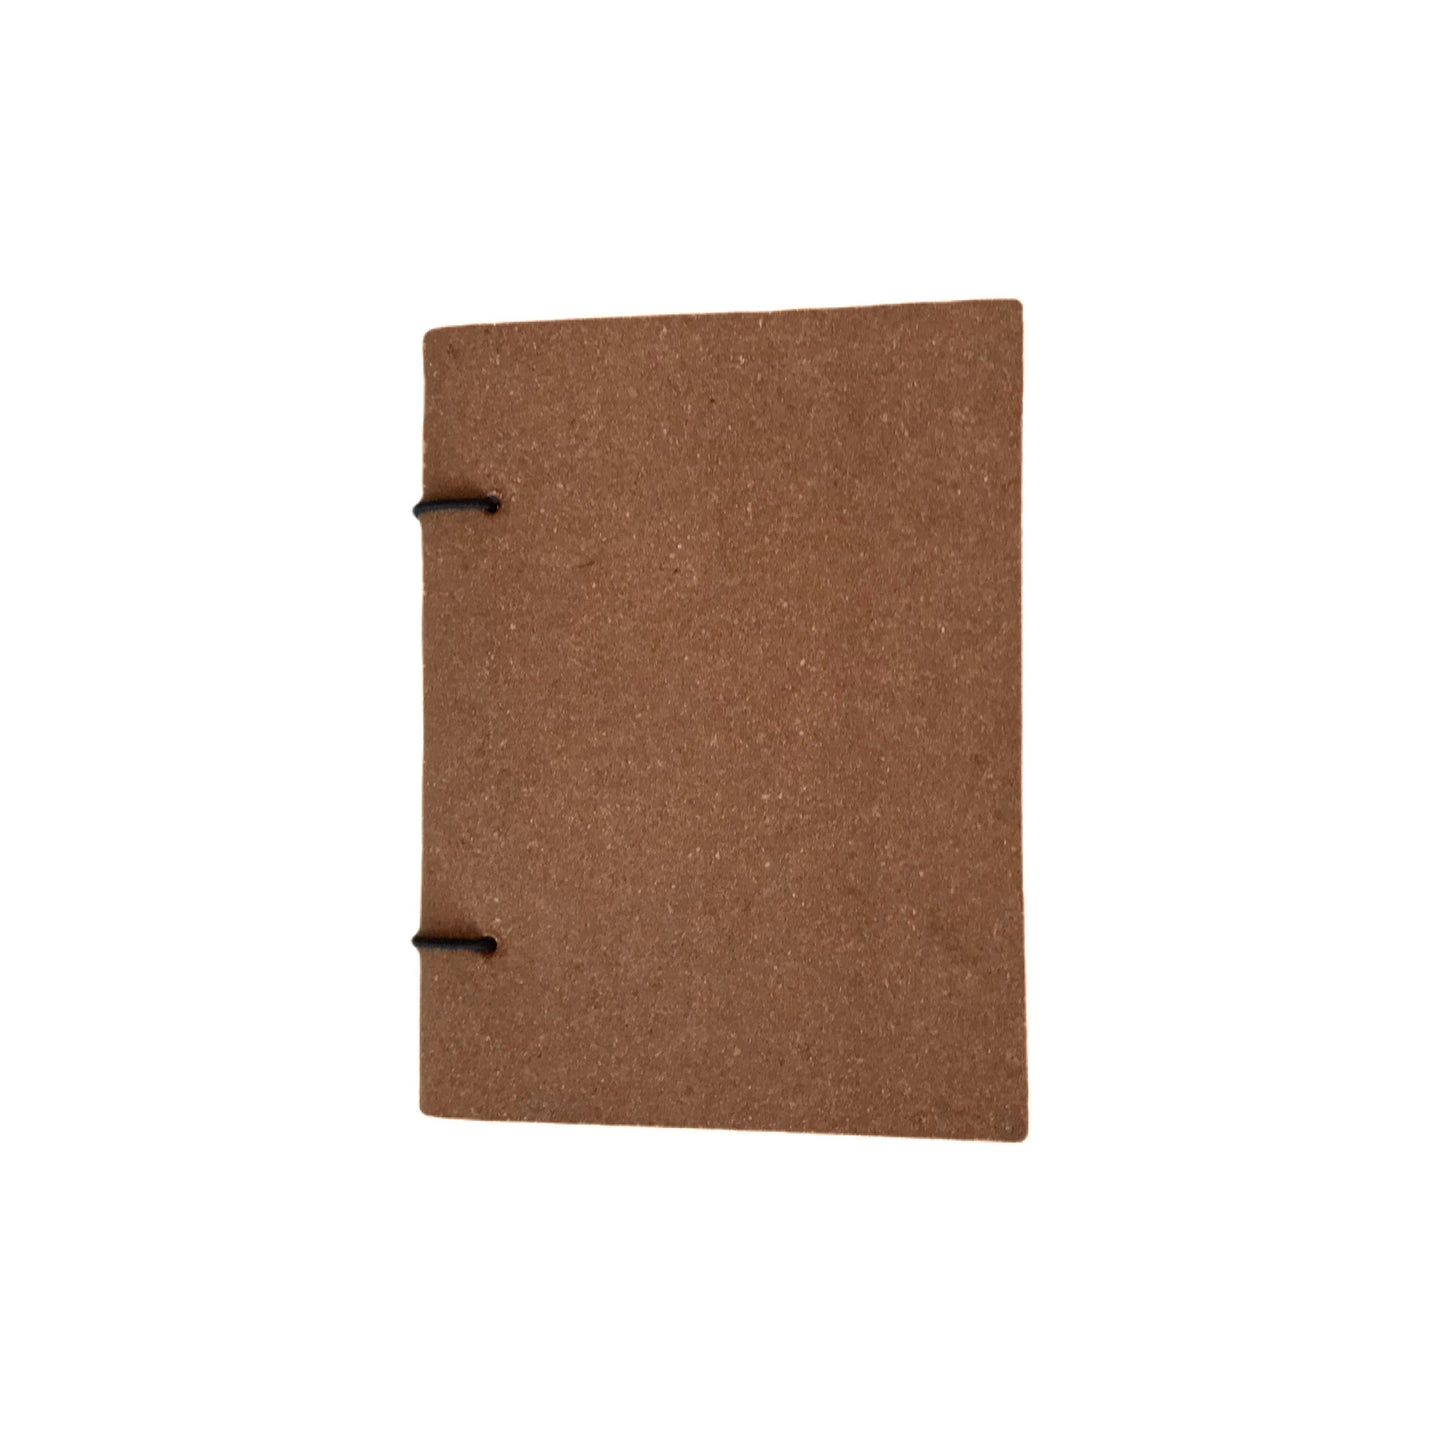 A6 Recycled Leather Bound Paper Notebook